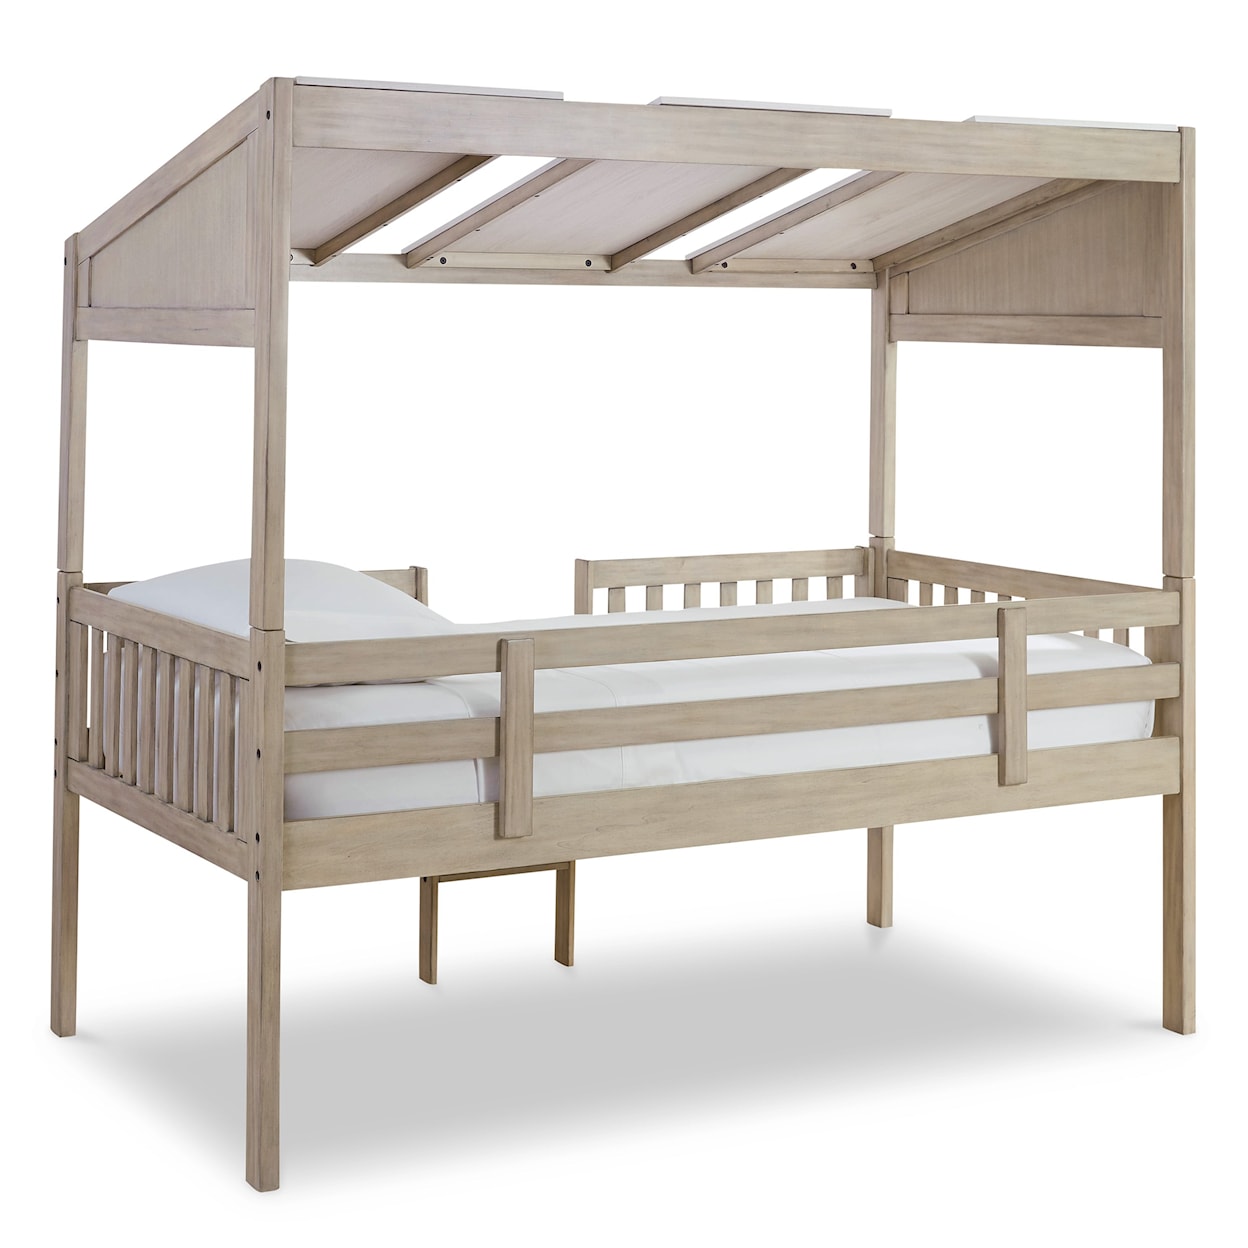 Ashley Furniture Signature Design Wrenalyn Twin Loft Bed with Roof